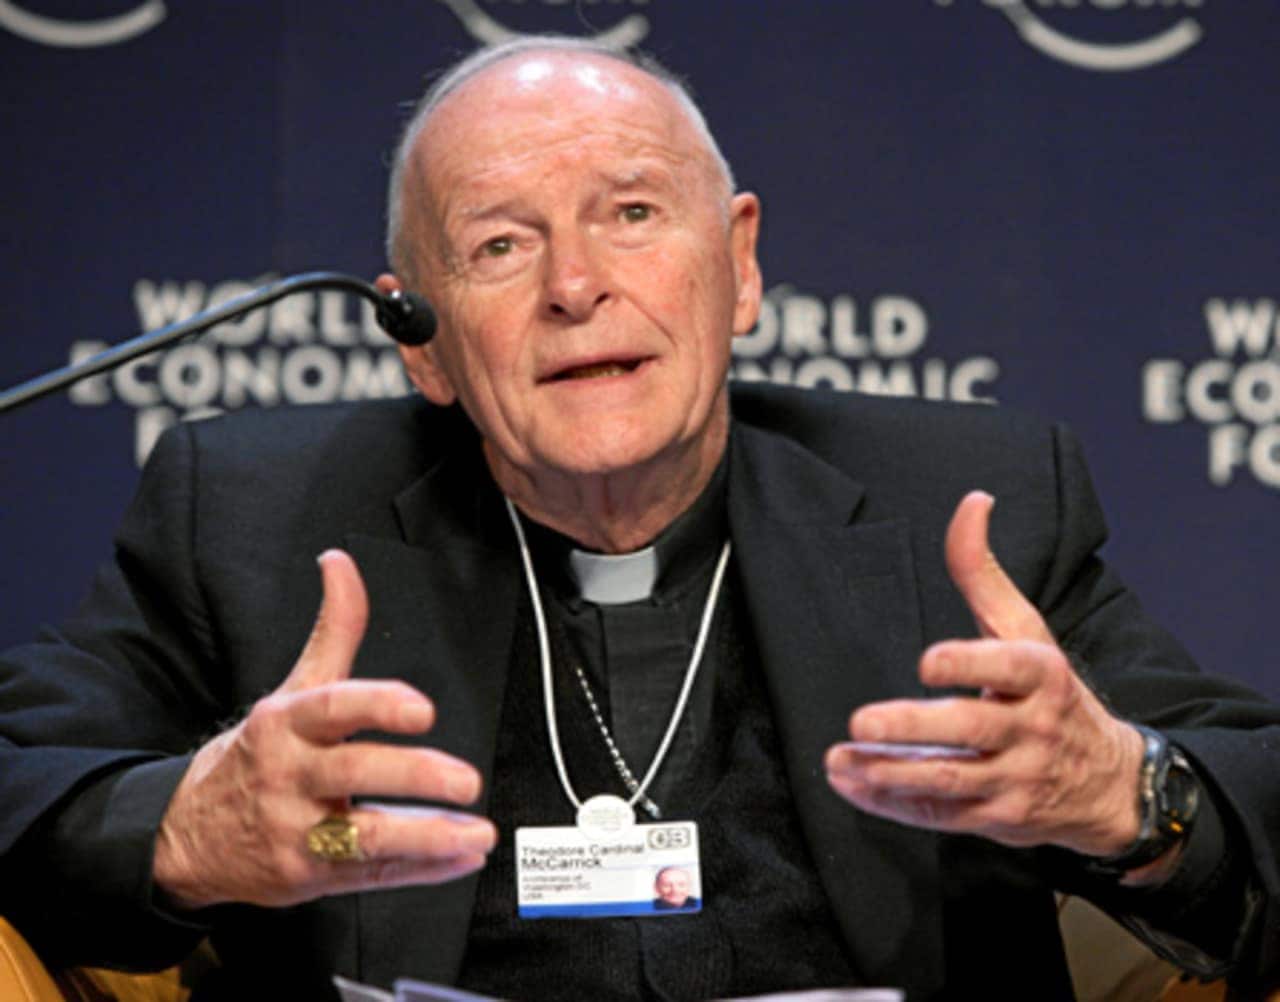 Ex-Cardinal Theodore McCarrick, formerly the Archbishop of Newark, is named in a new lawsuit that claims he ran a sex abuse ring from his Jersey Shore beach house in Sea Girt.